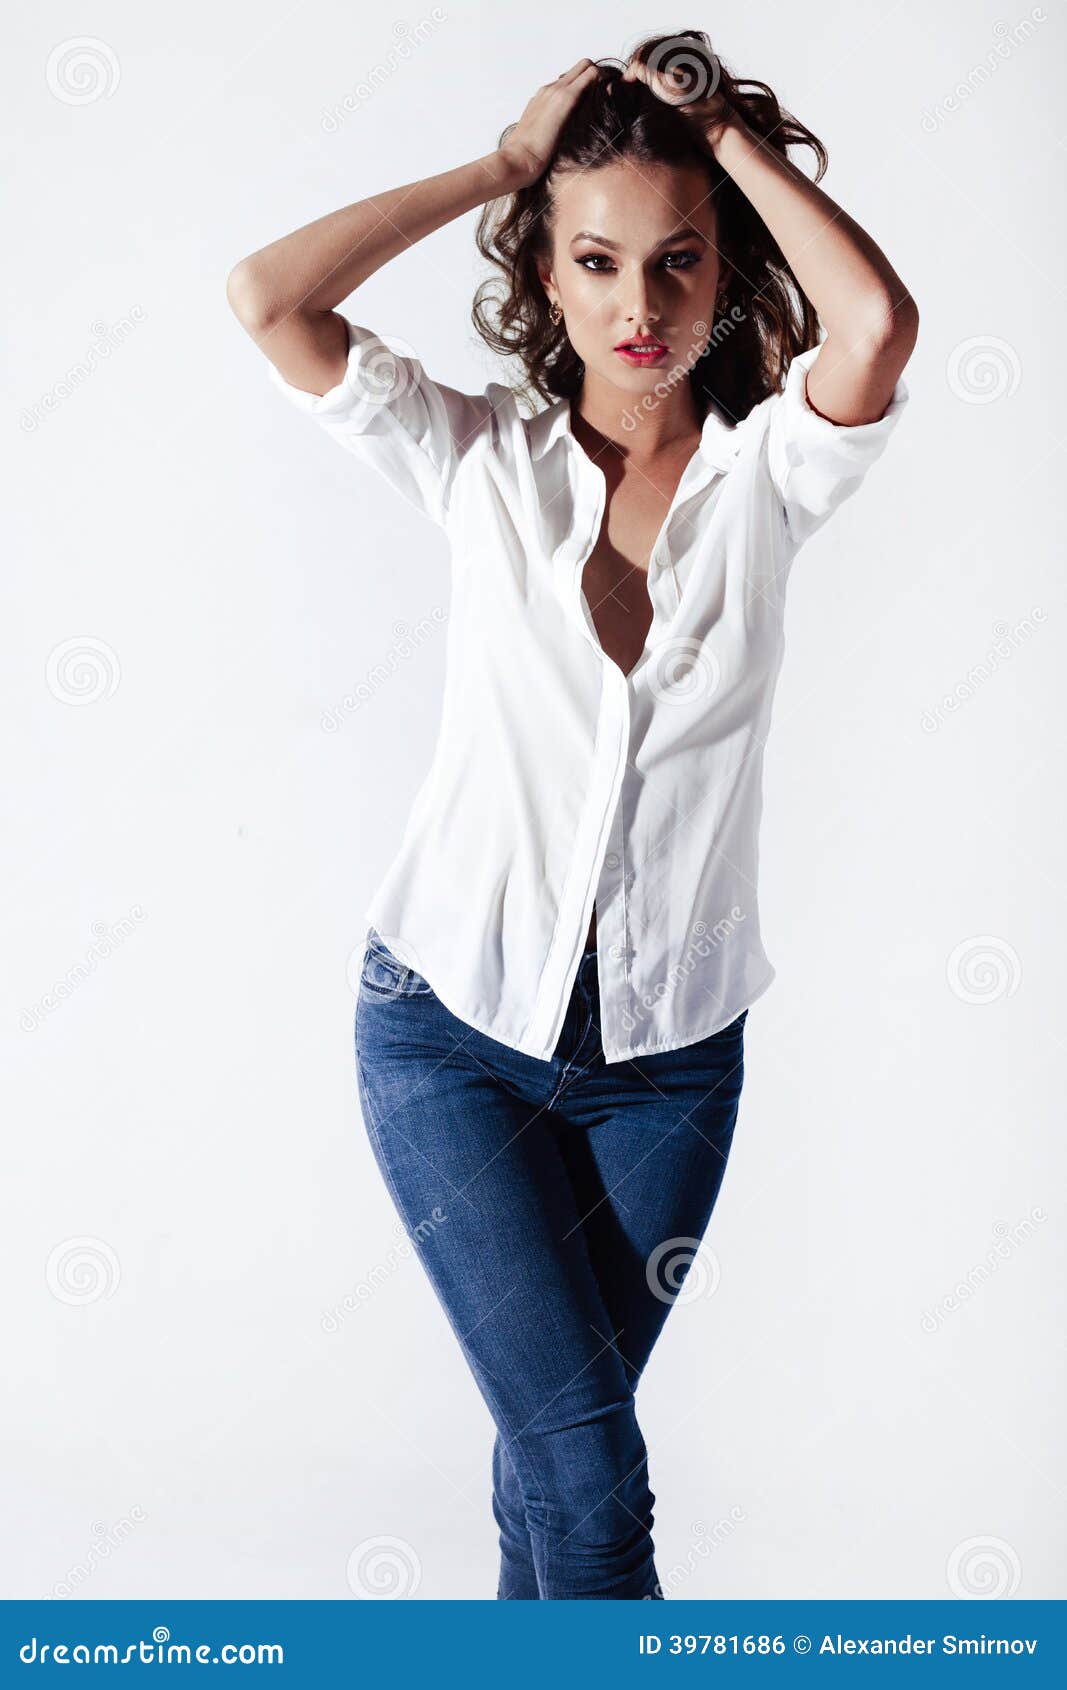 Fashion Model In A Blouse And Jeans Barefoot Stock Photo - Image of ...